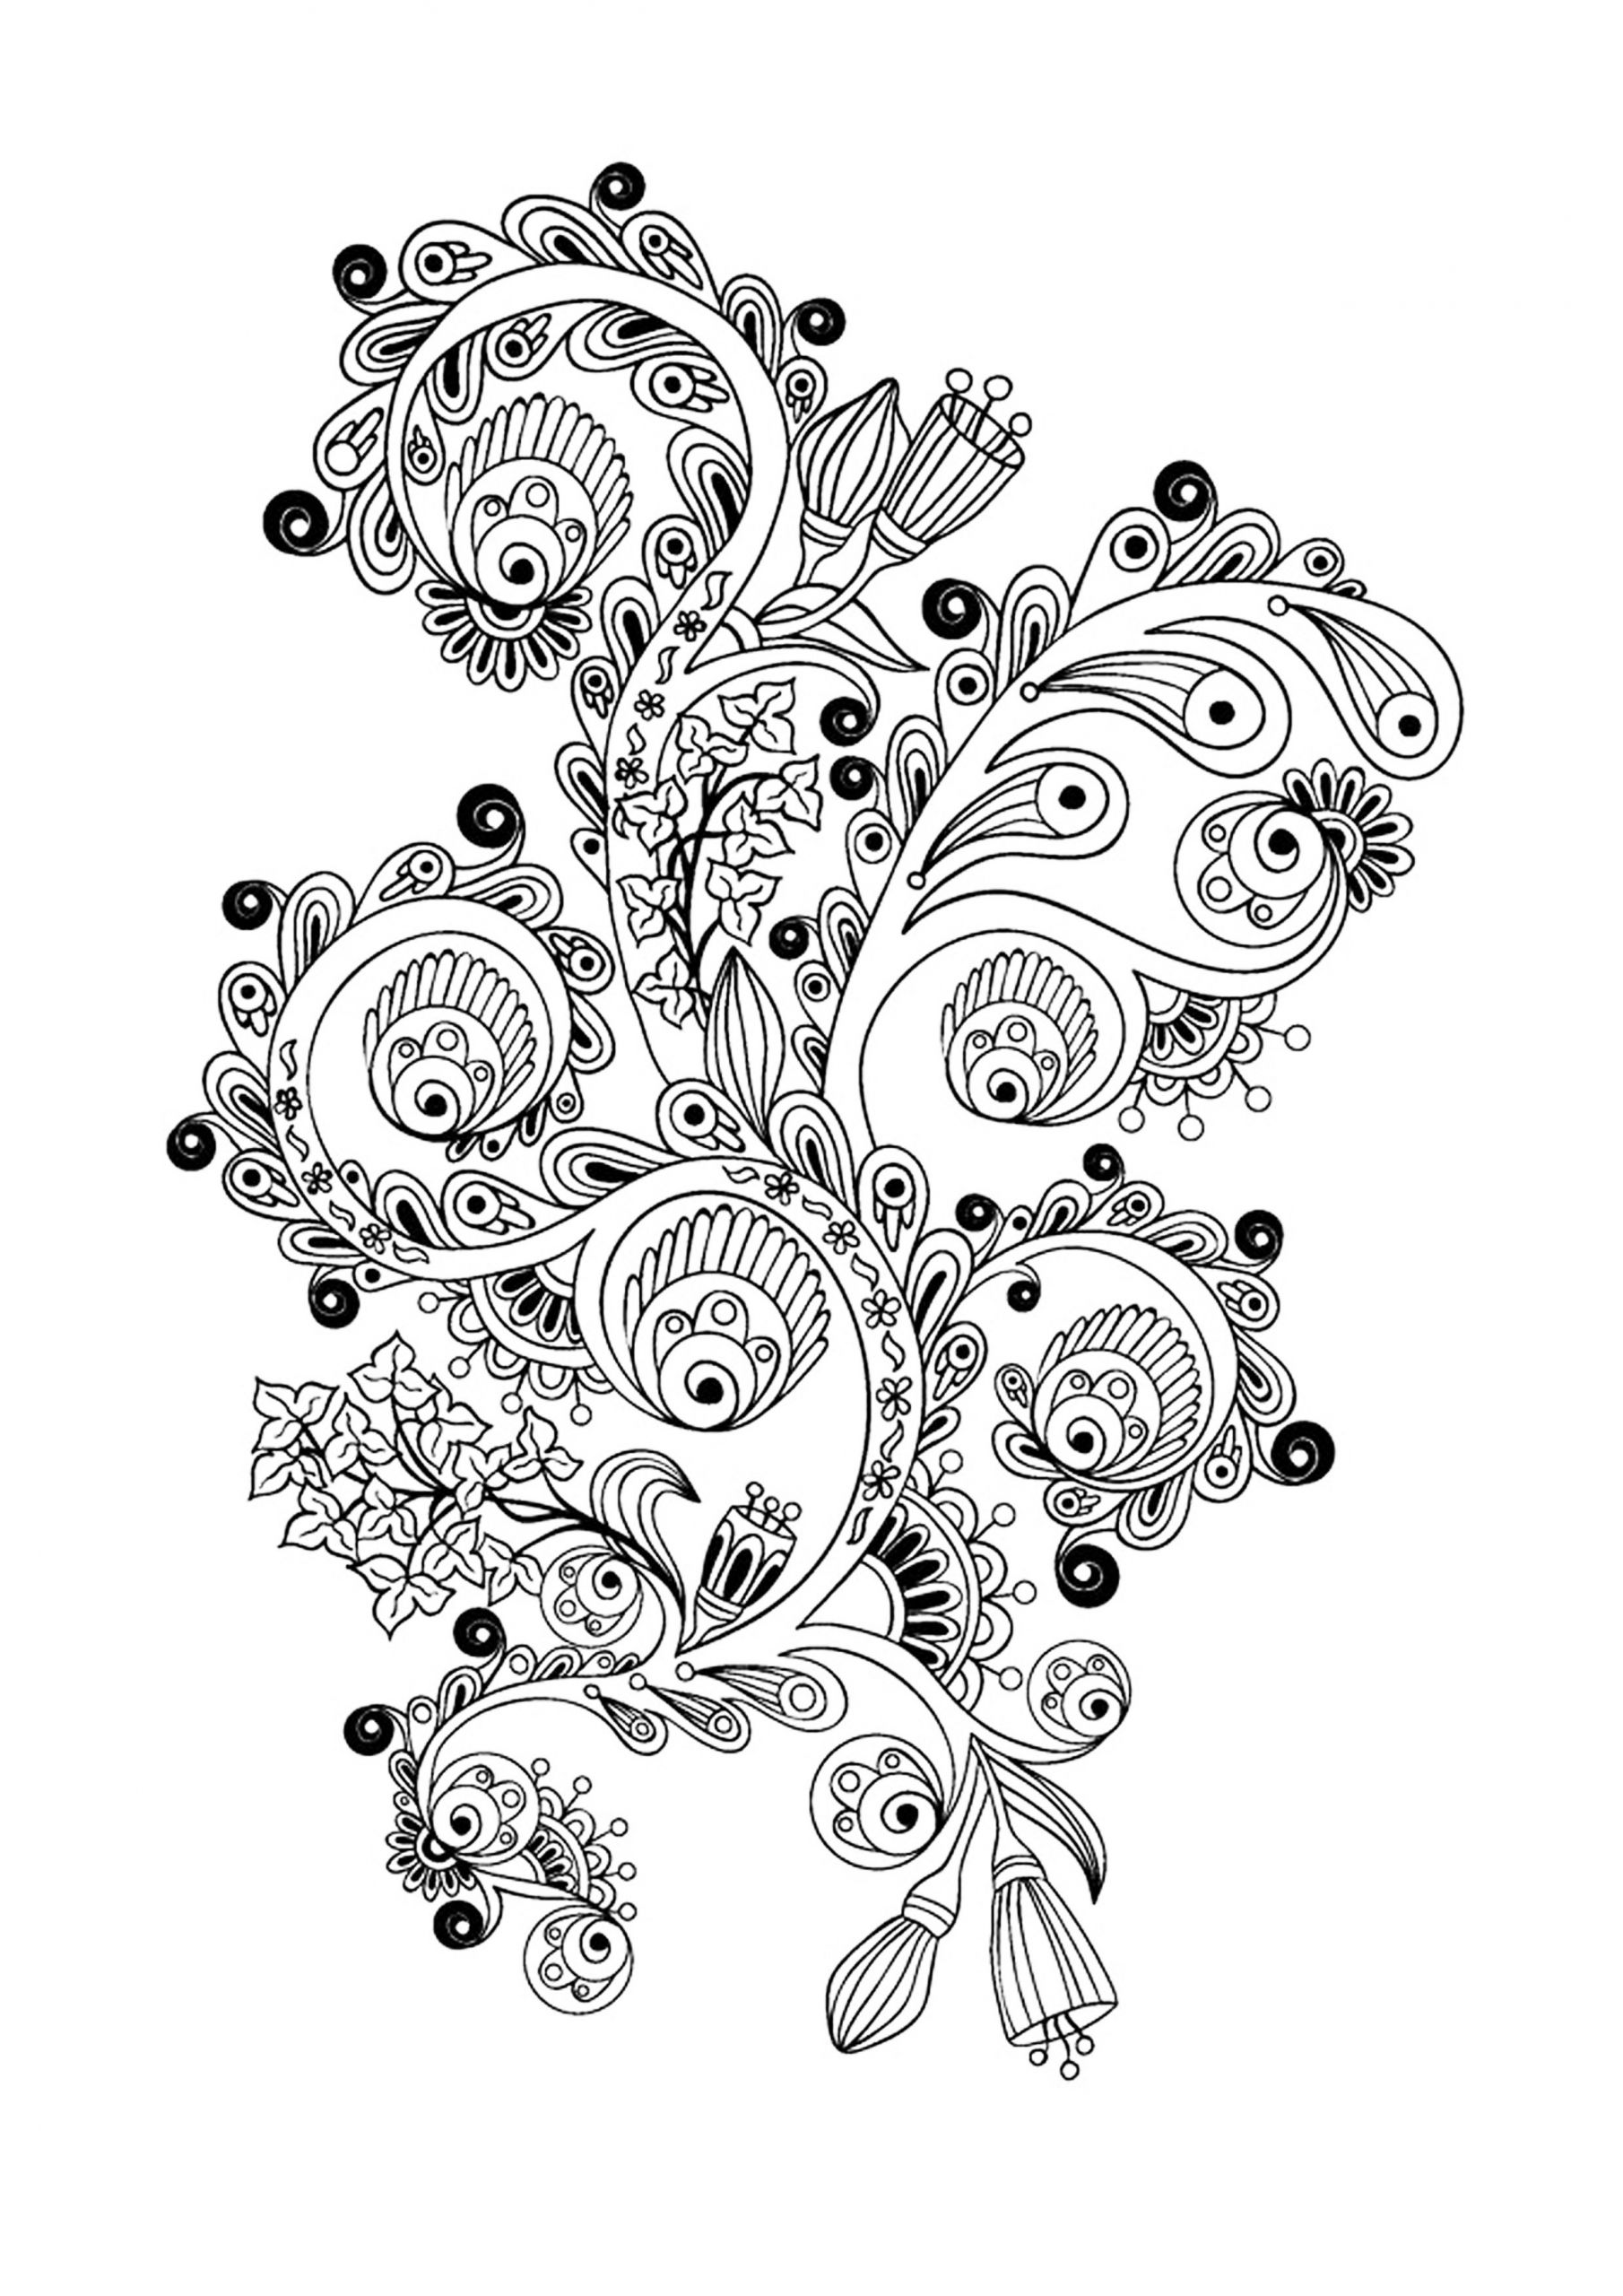 Coloring Pages For Adults Abstract Flowers
 Flower Coloring Pages for Adults Best Coloring Pages For